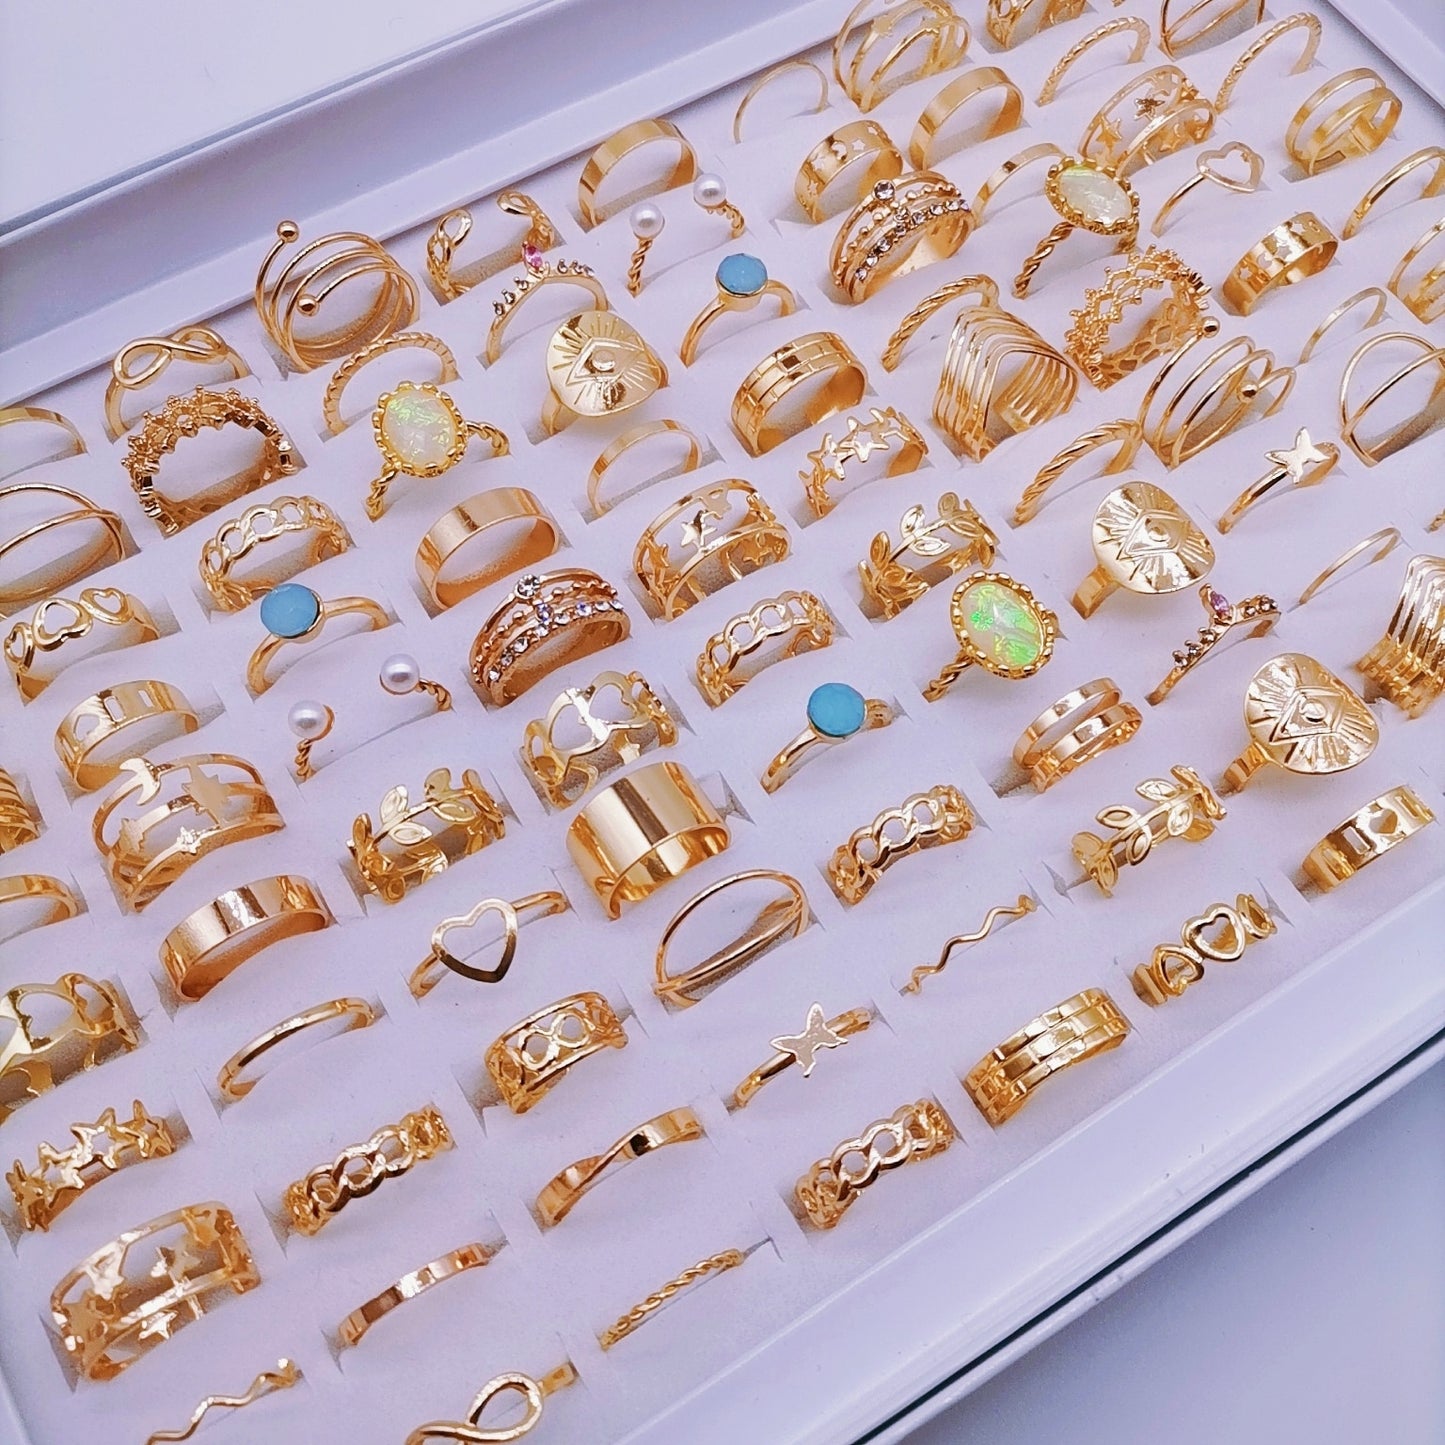 Queen's Rings: Beautiful 100-Piece Women's Premium Ring Collection